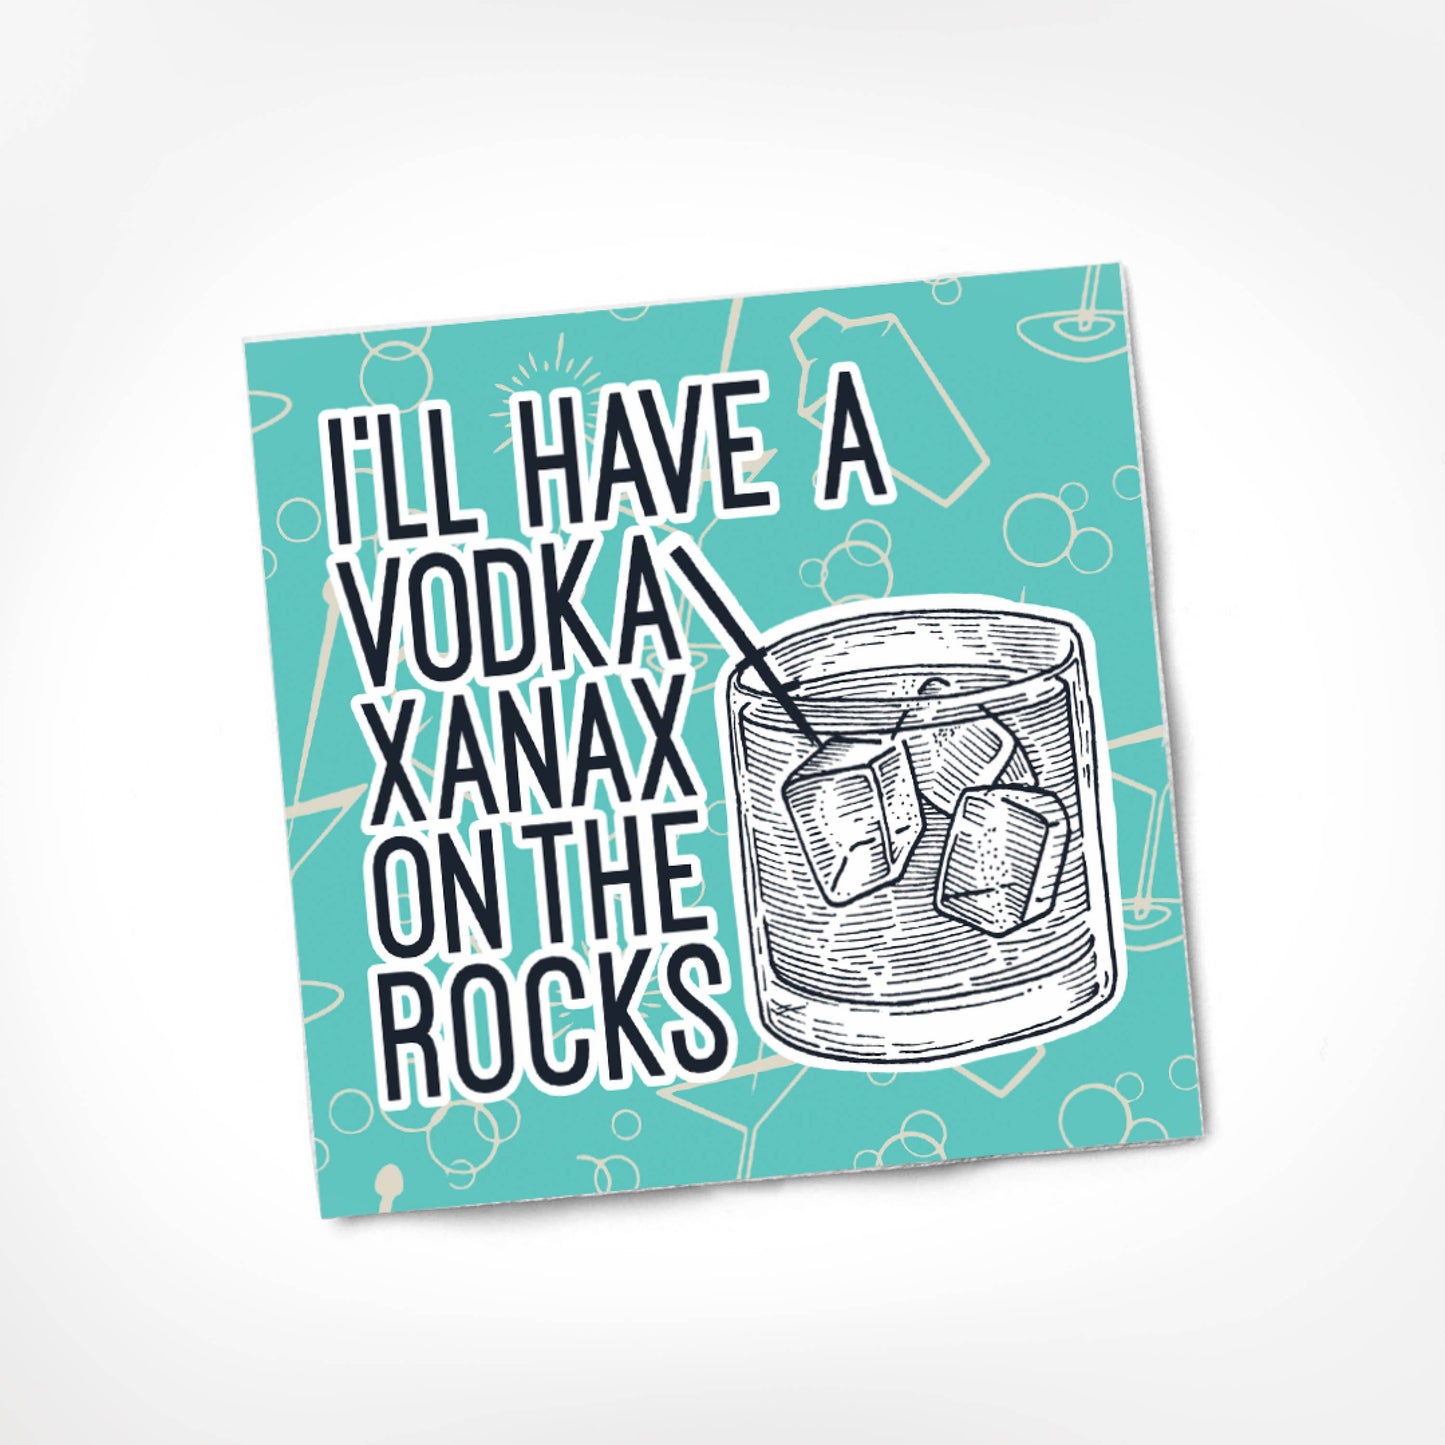 I'll Have a Vodka Xanax on the Rocks - Cocktail Napkins